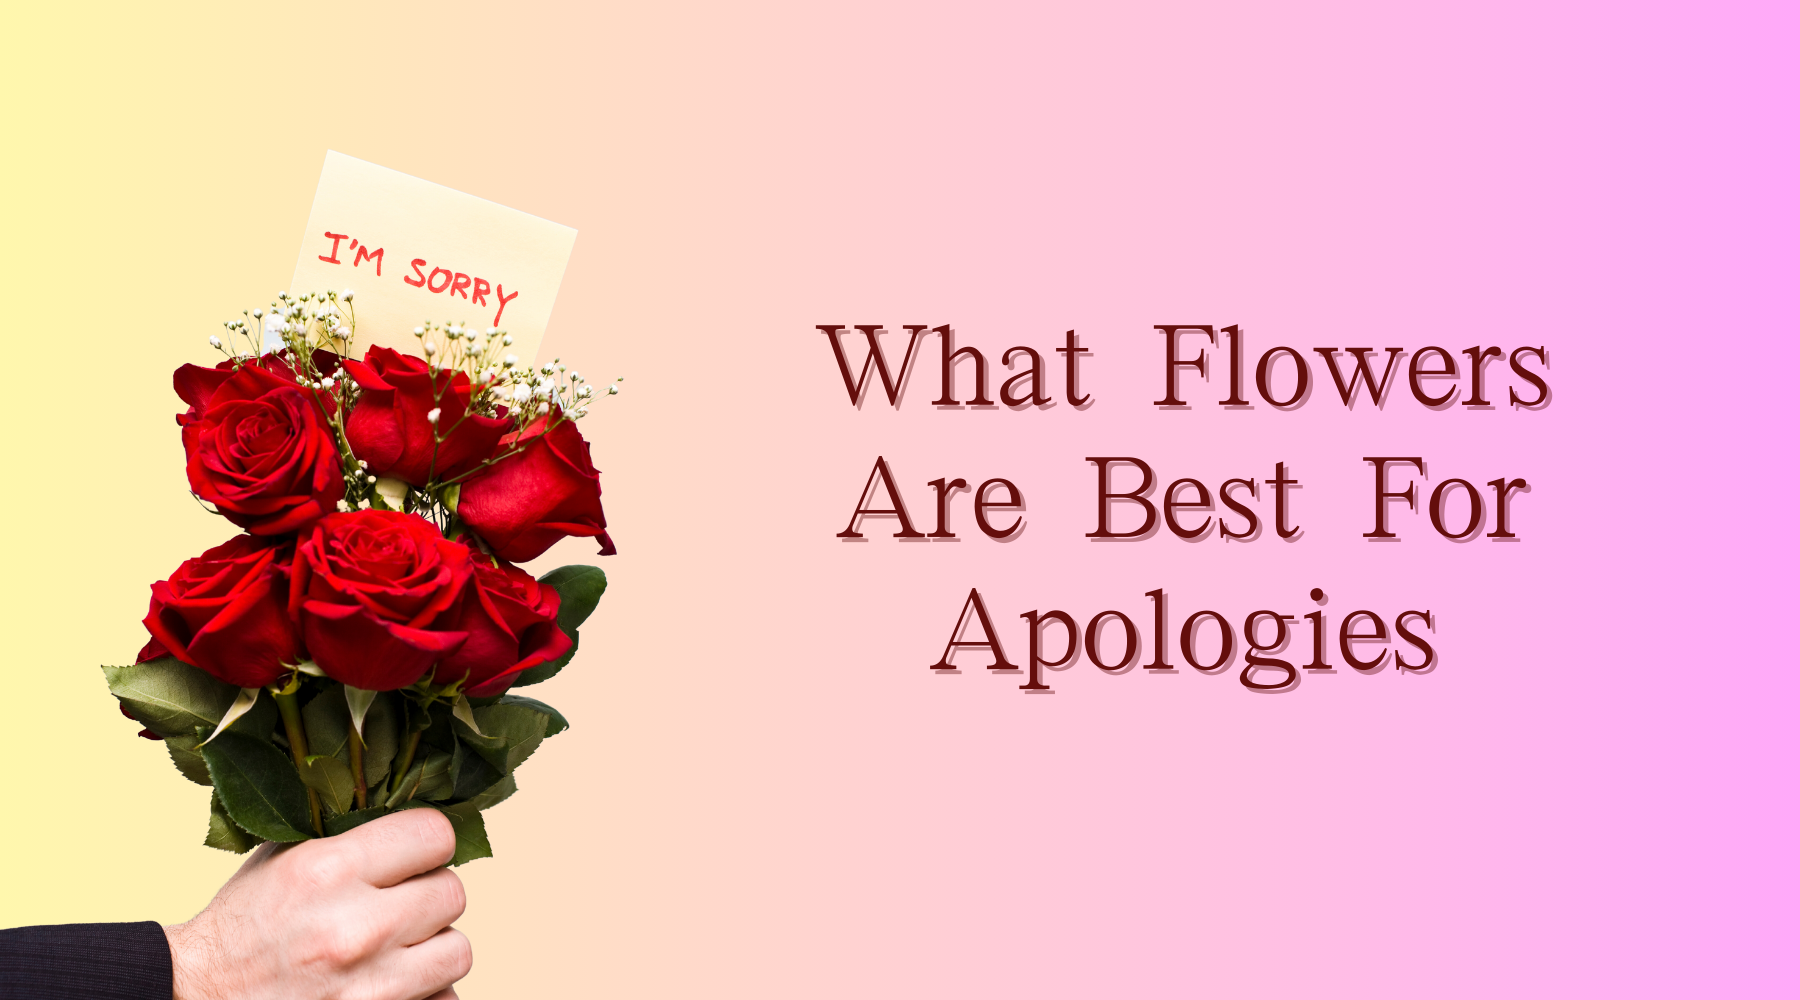 What Flowers Are Best For Apologies